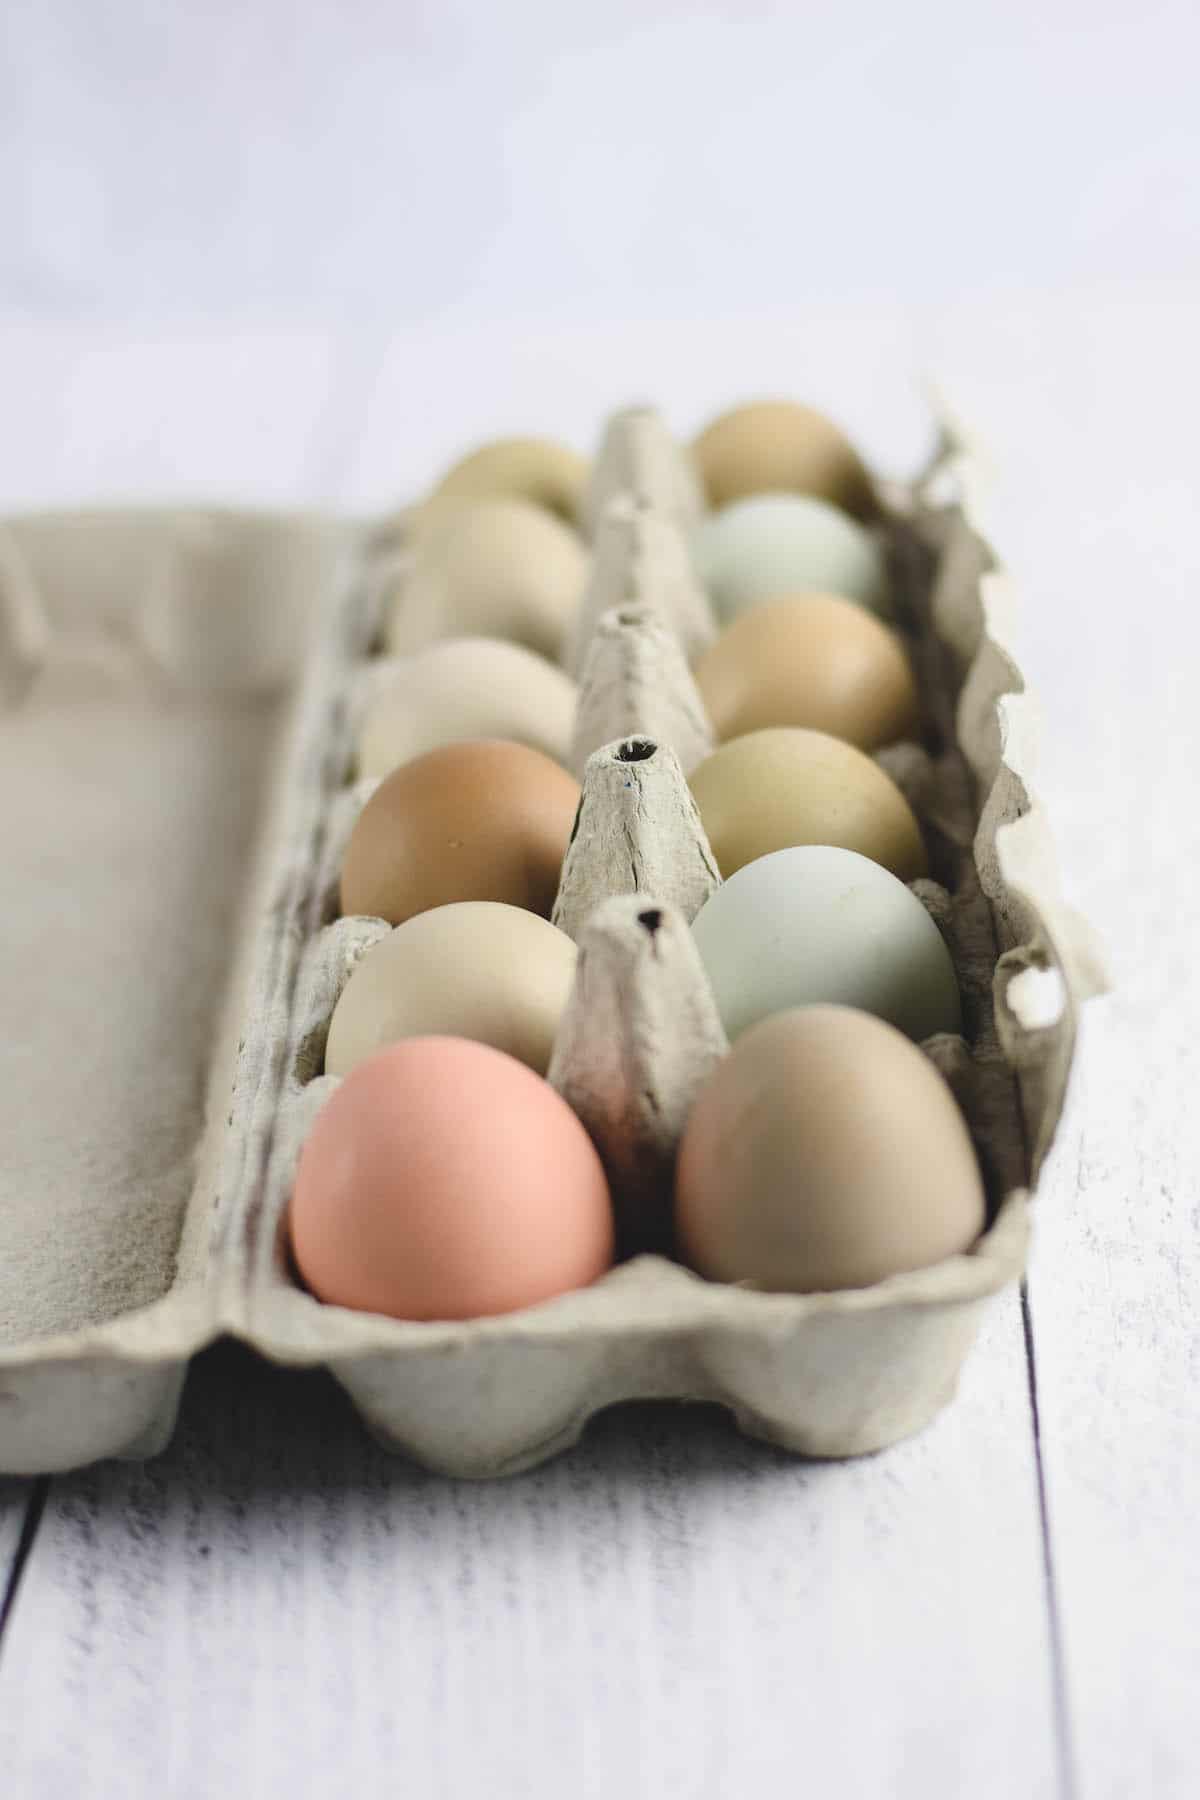 egg carton filled with a variety of colorful eggs